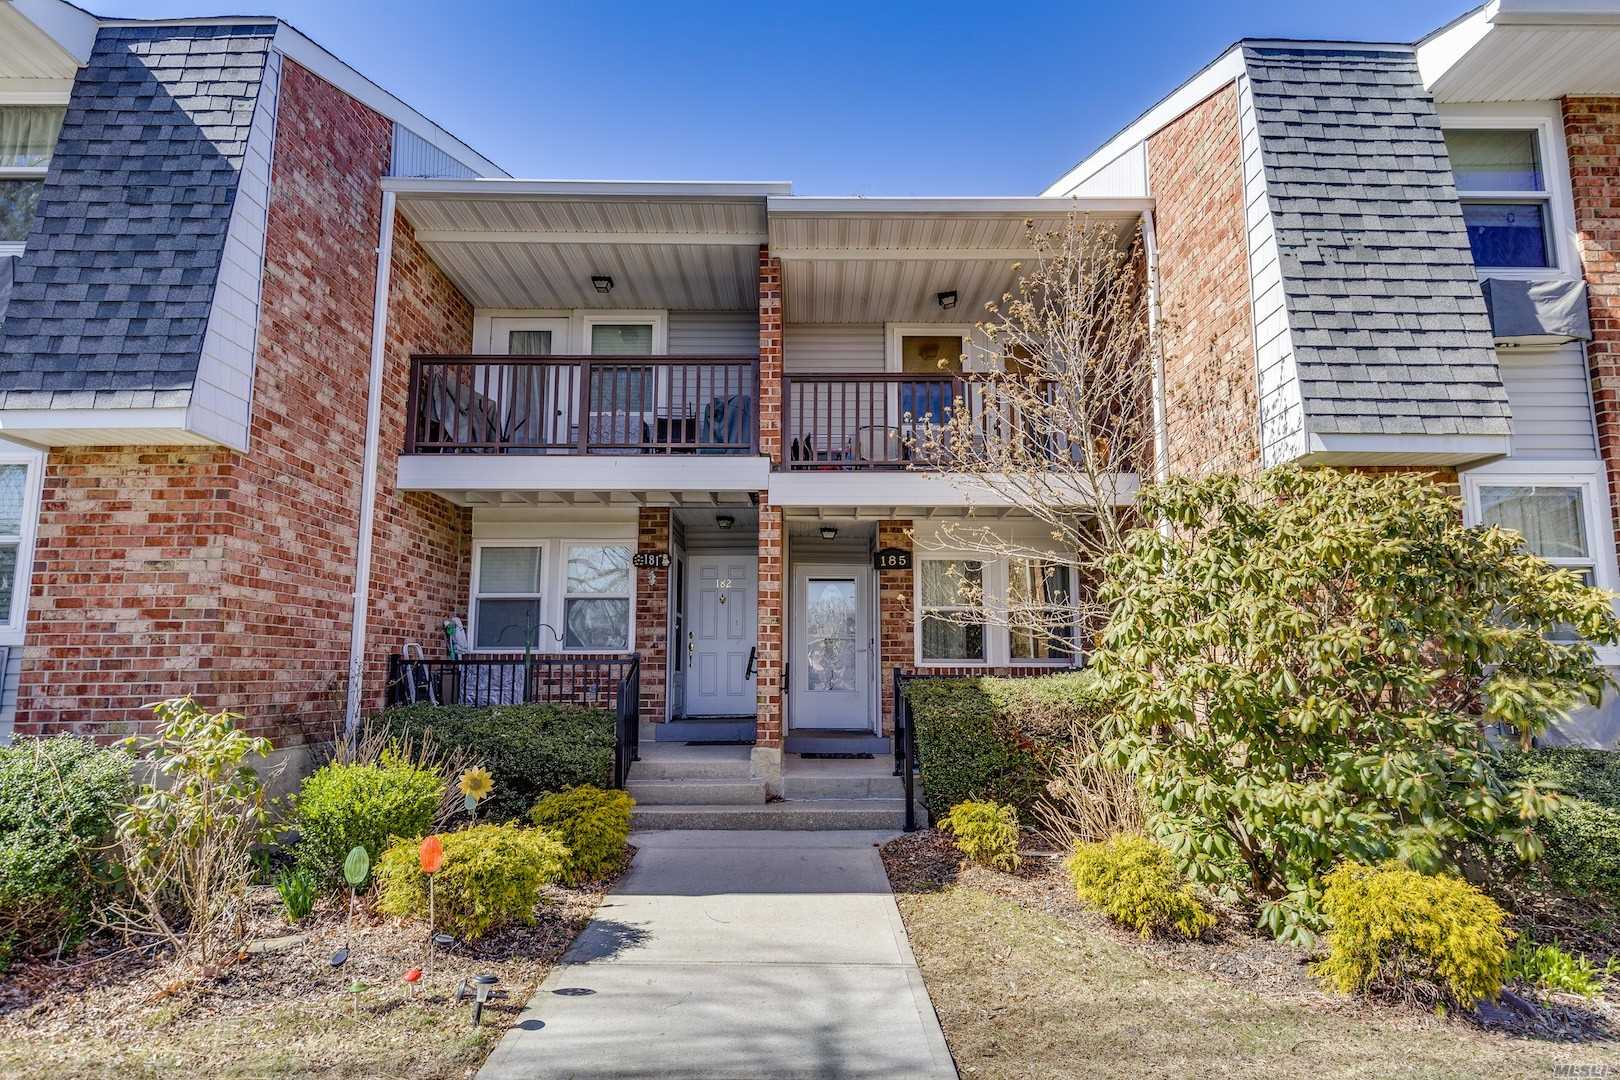 Beautiful Large 1st Floor Courtyard Unit. 2 Bedrooms, Updated Kitchen W/Cherry Cabinets, Updated Bathroom,  Generous Closet Space & Storage,  Easy Access To Laundry. Maintenance Shown Before Star And -67% Tax Deductible, Maintenance Includes All But Electric And Cable. Enjoy Country Club Living In This Beautifully Landscaped Gated Community.